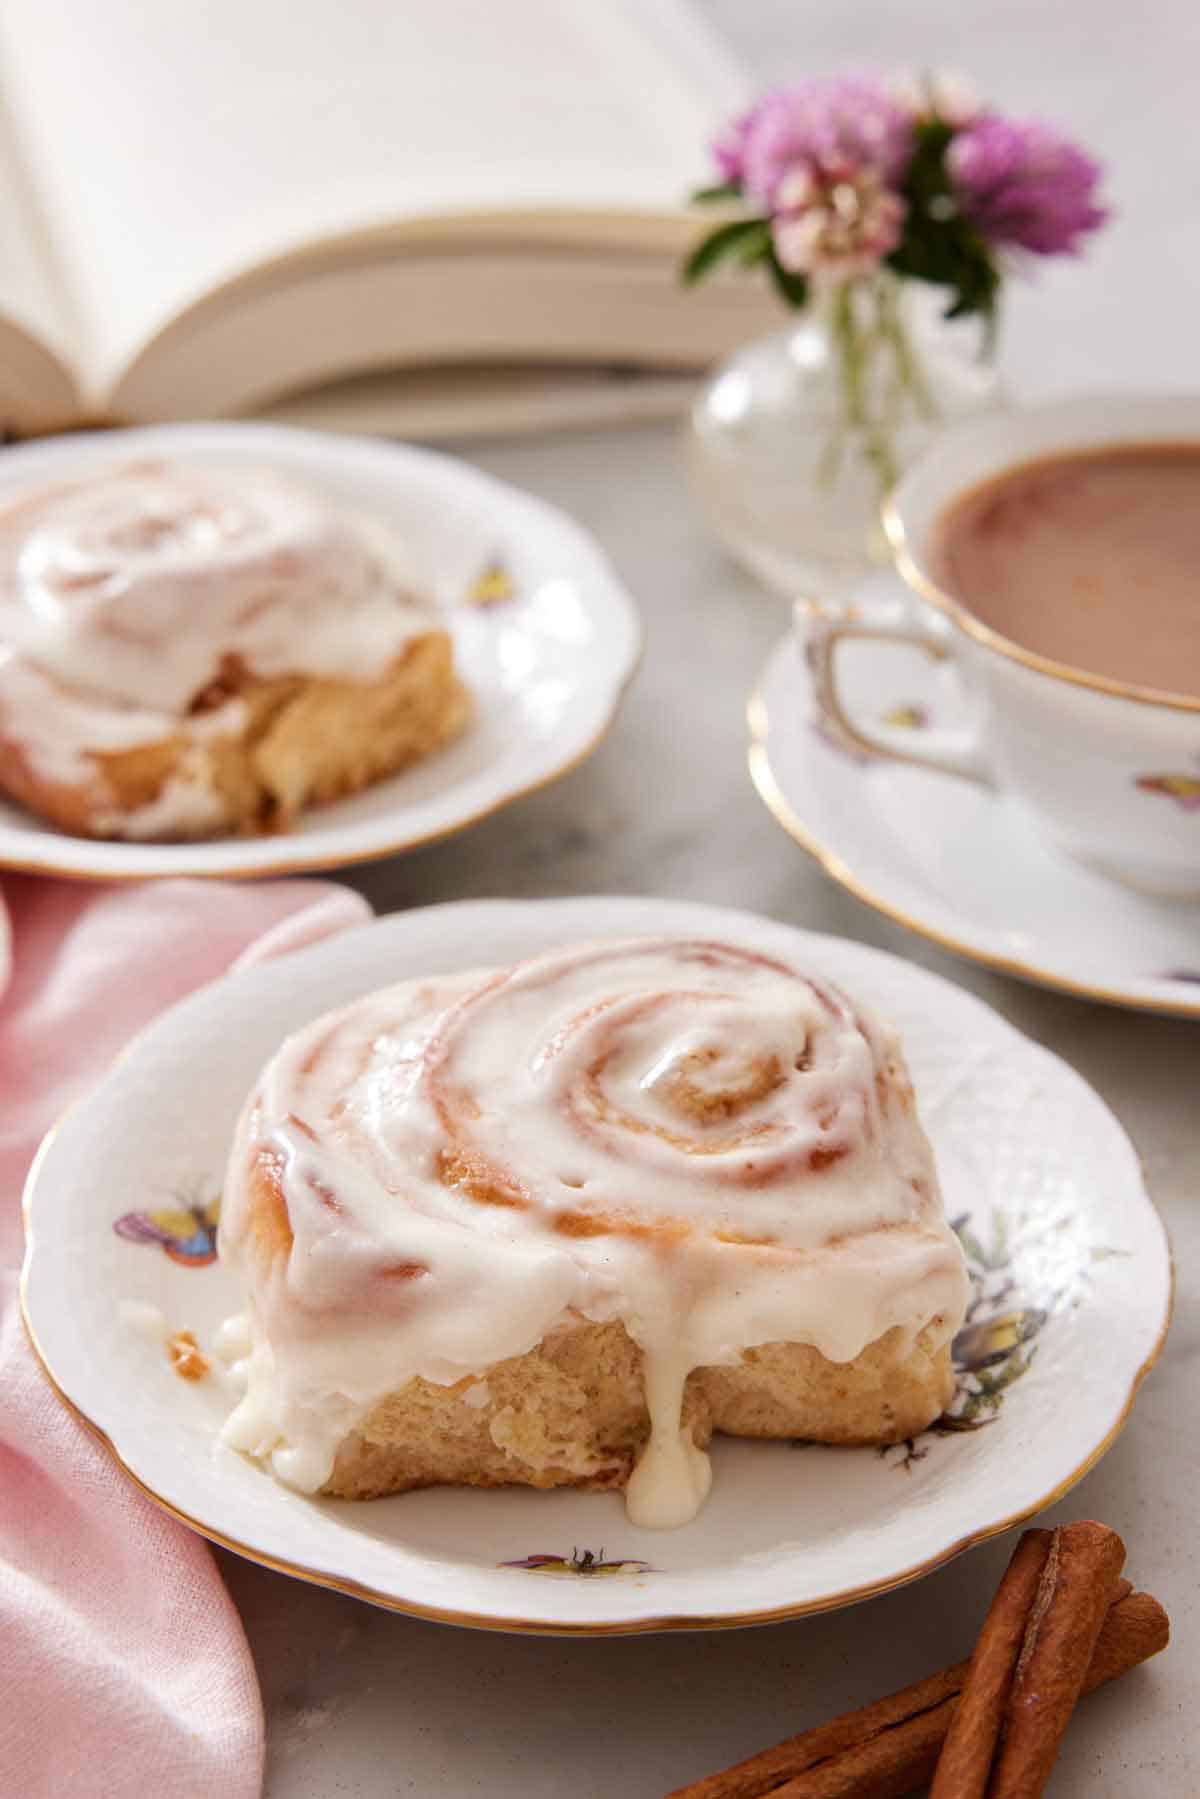 Two plates with cinnamon rolls and a cup of coffee in the background with some flowers and a book.